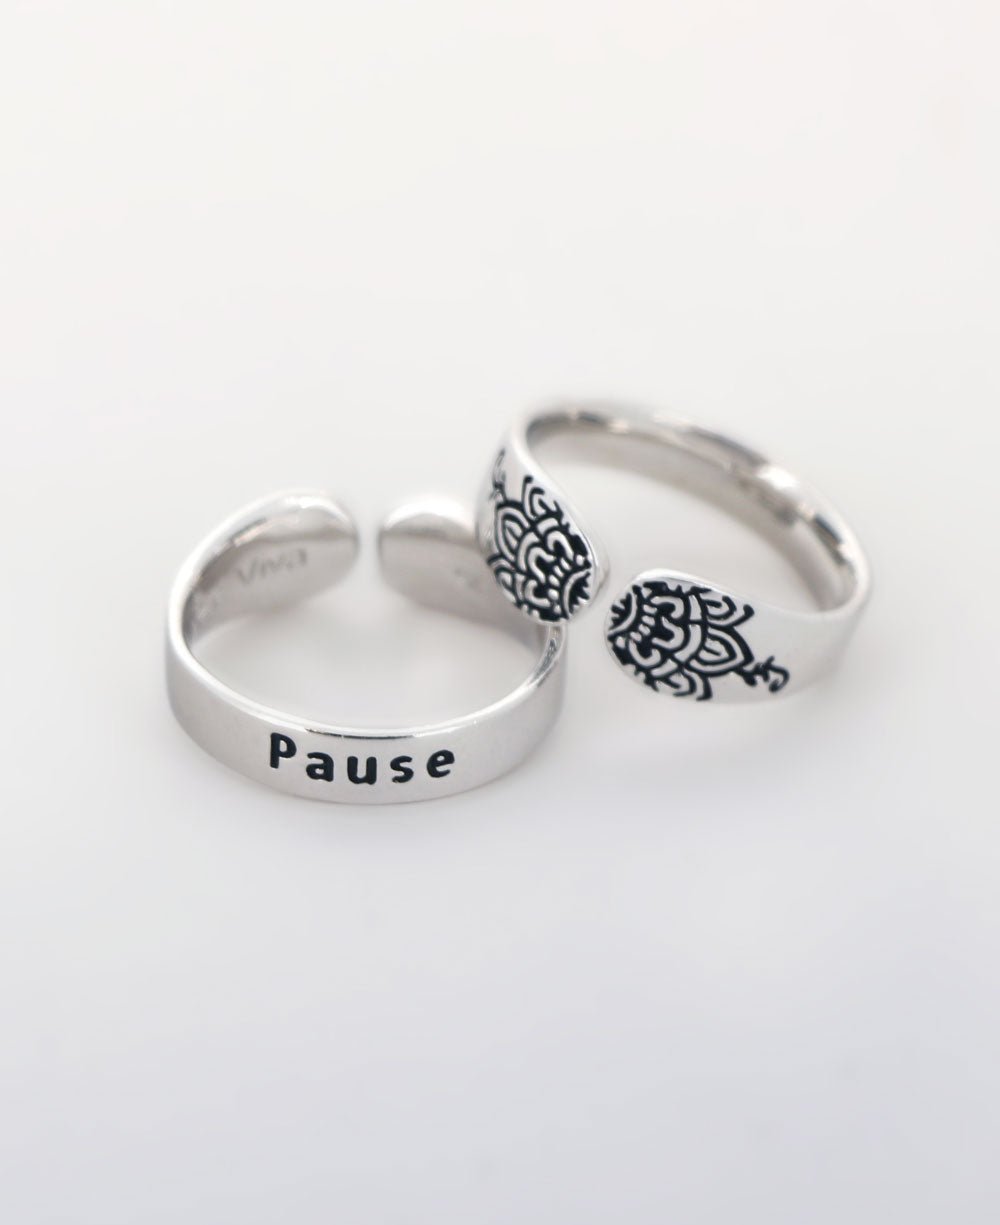 Pause Mindful Sterling Silver Adjustable Ring - Rings